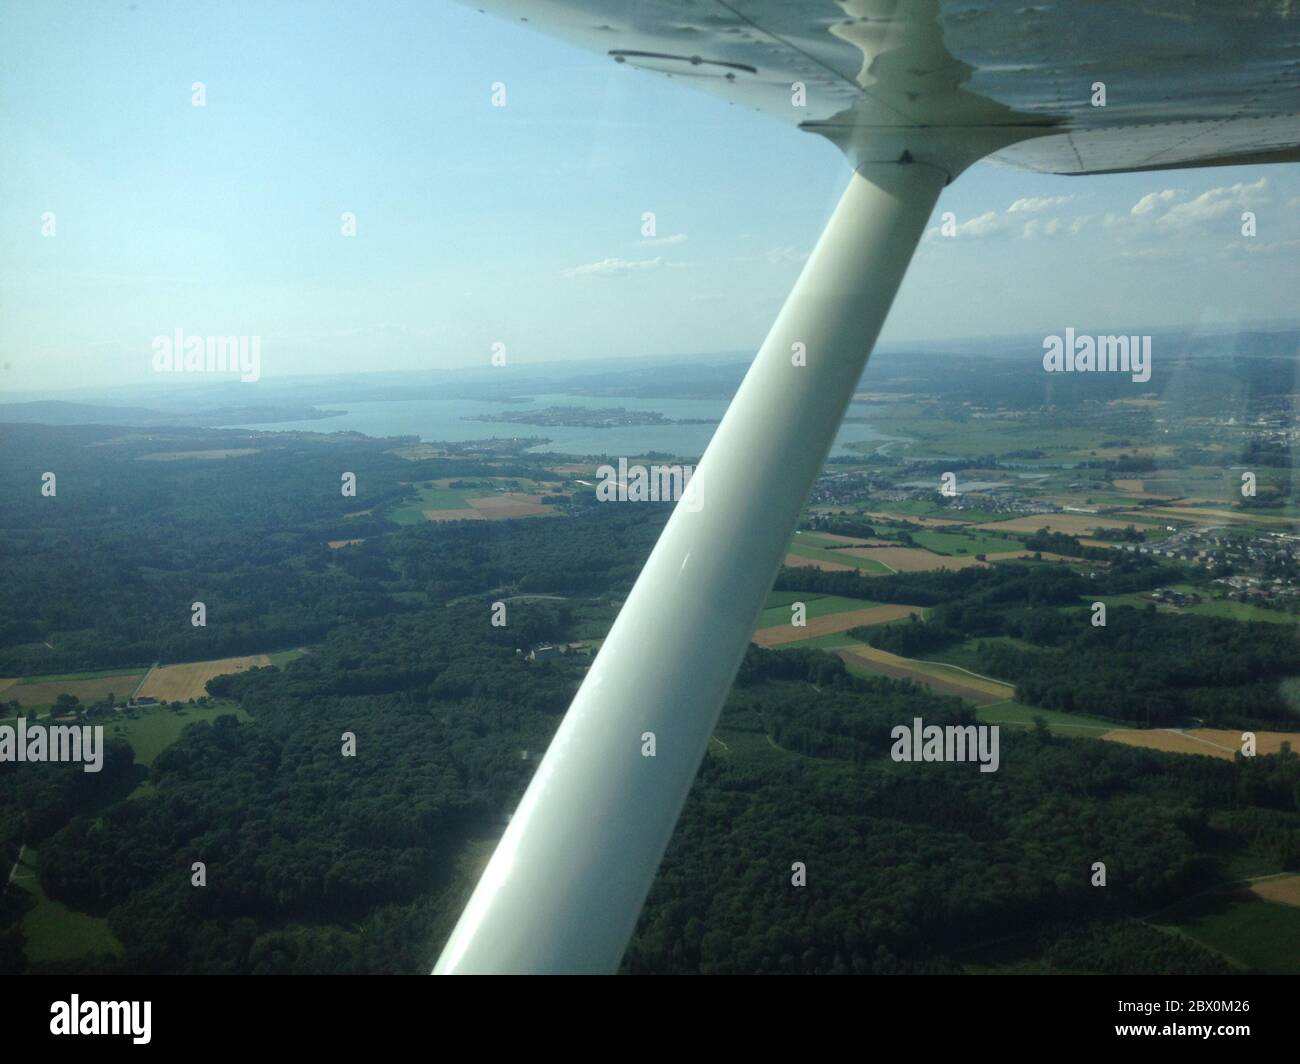 Lake of constance round trip in a small propellerplane 11.7.2015 Stock Photo